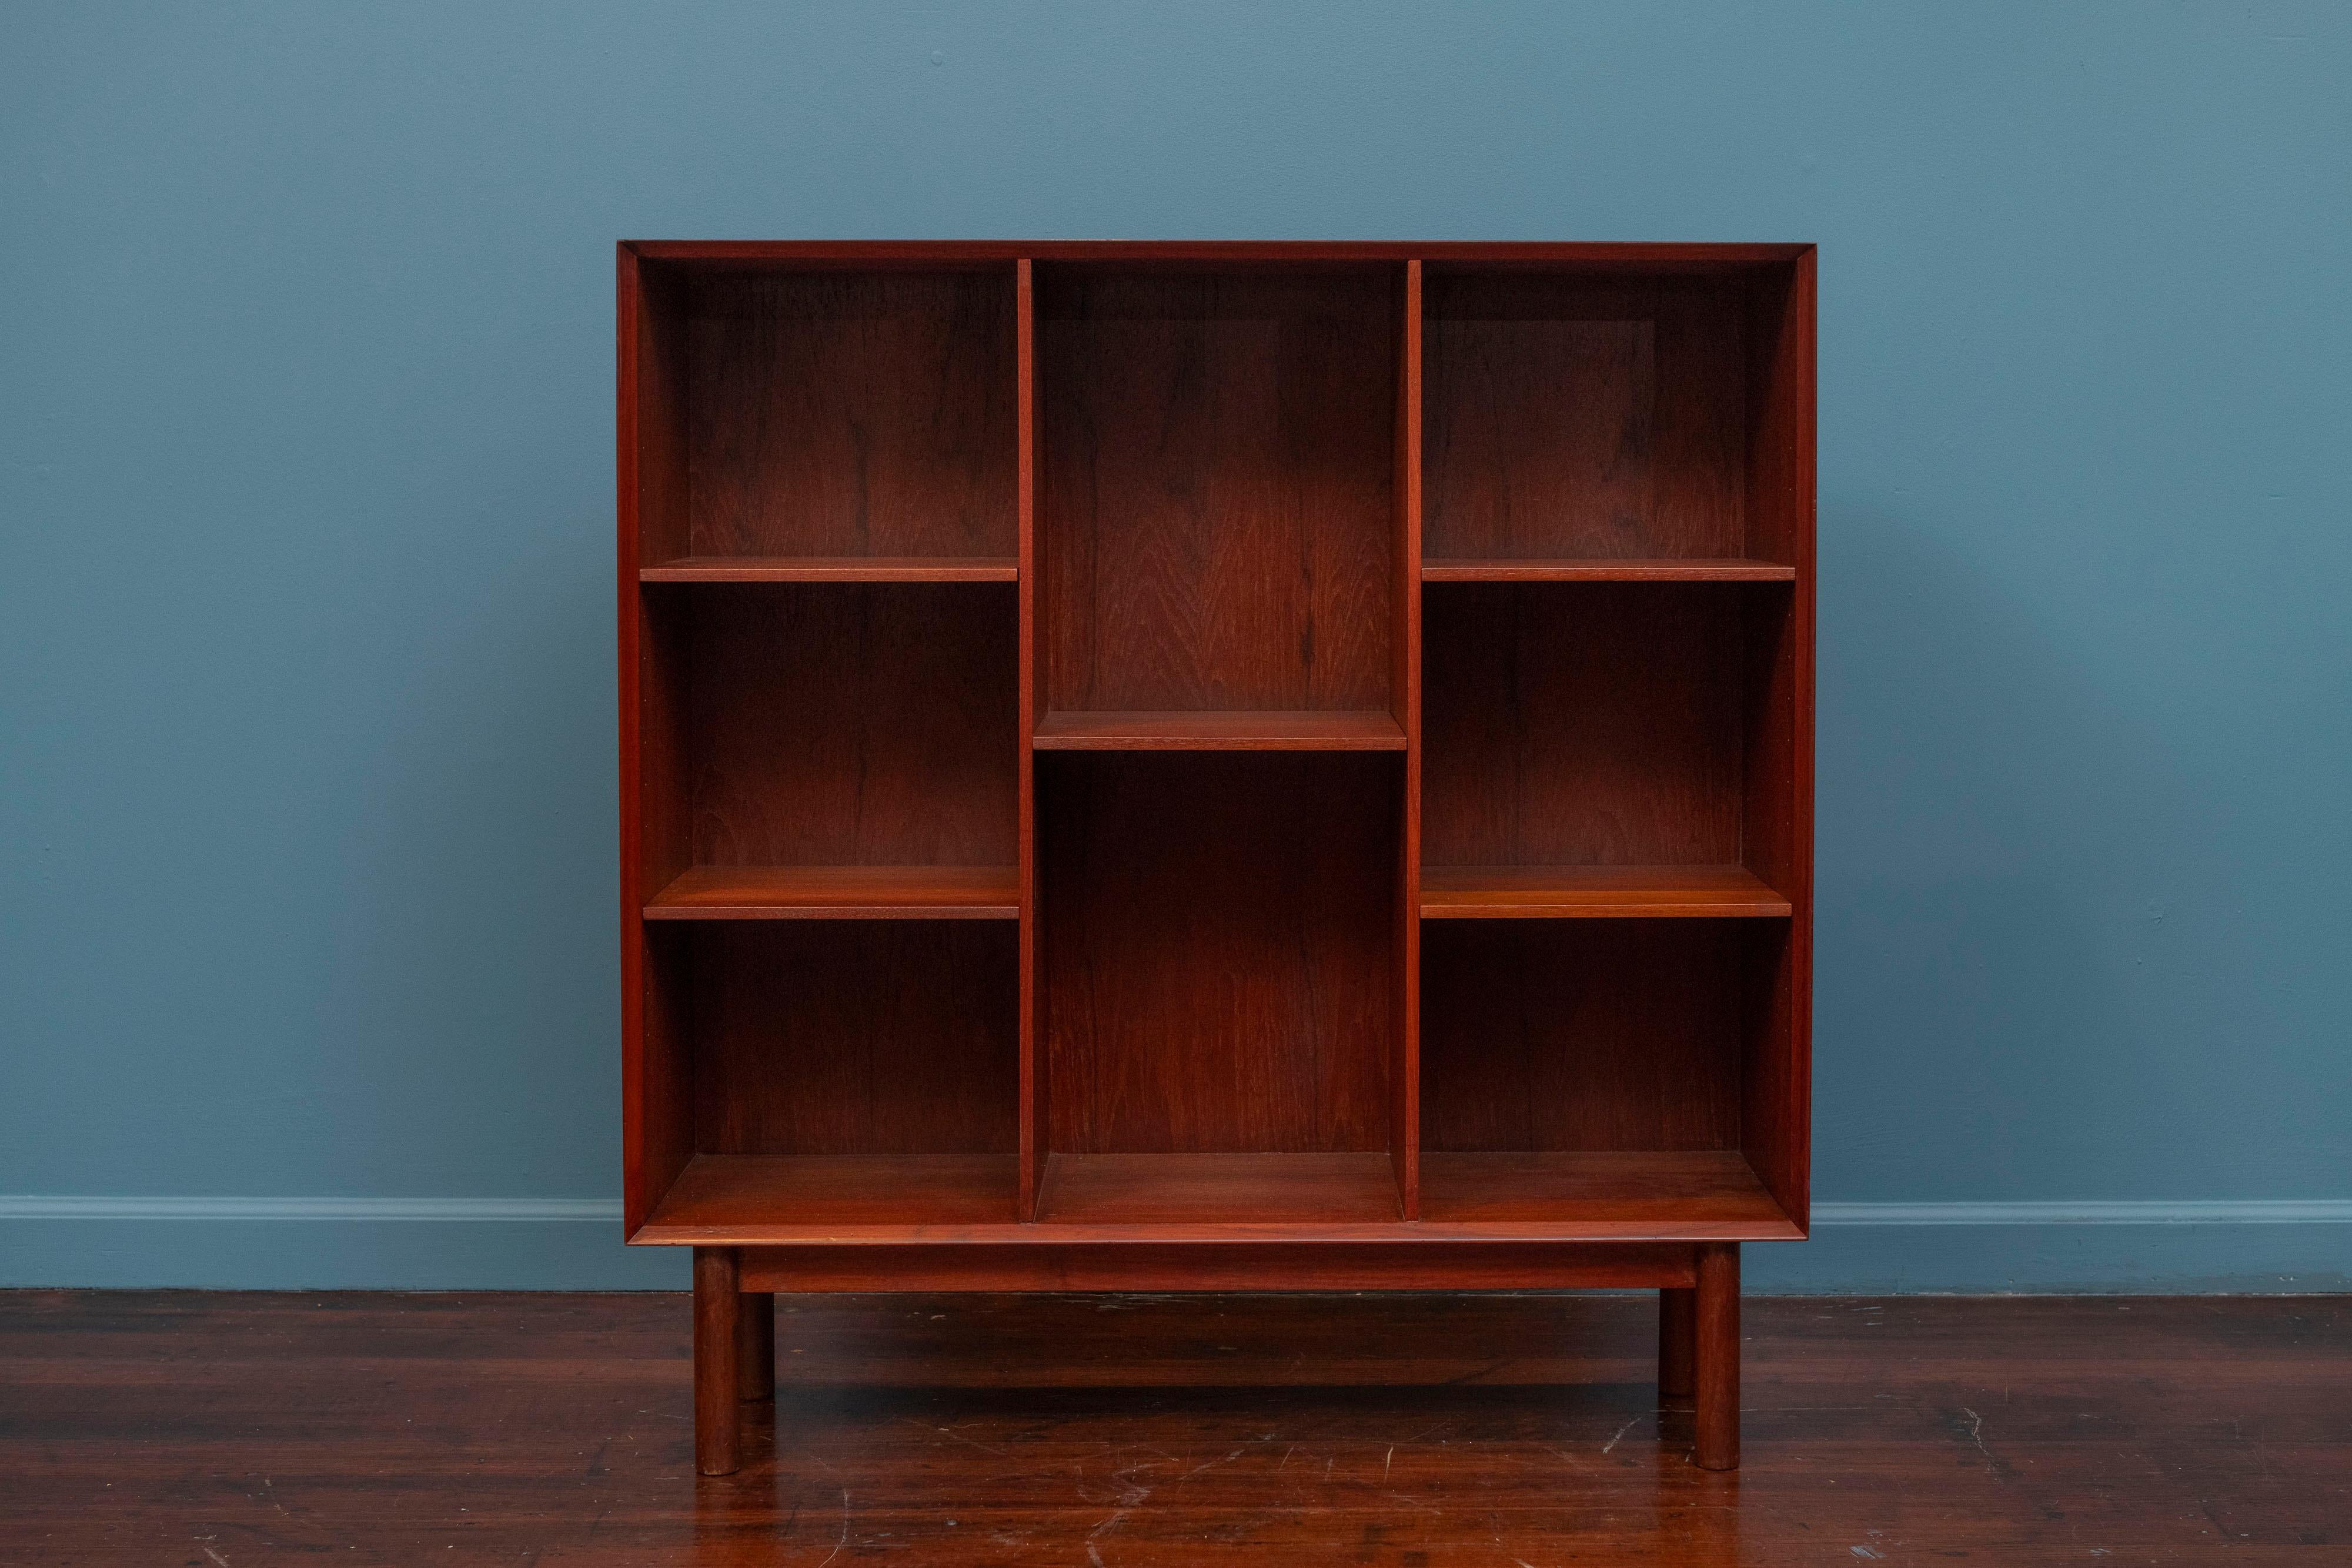 Peter Hvidt & Orla Molgaard Nielsen design series 300 bookshelf for Soborg Mobler, Denmark. High quality construction and materials with simple yet sophisticated details. Newly refinished with adjustable shelves for displaying objects or books.